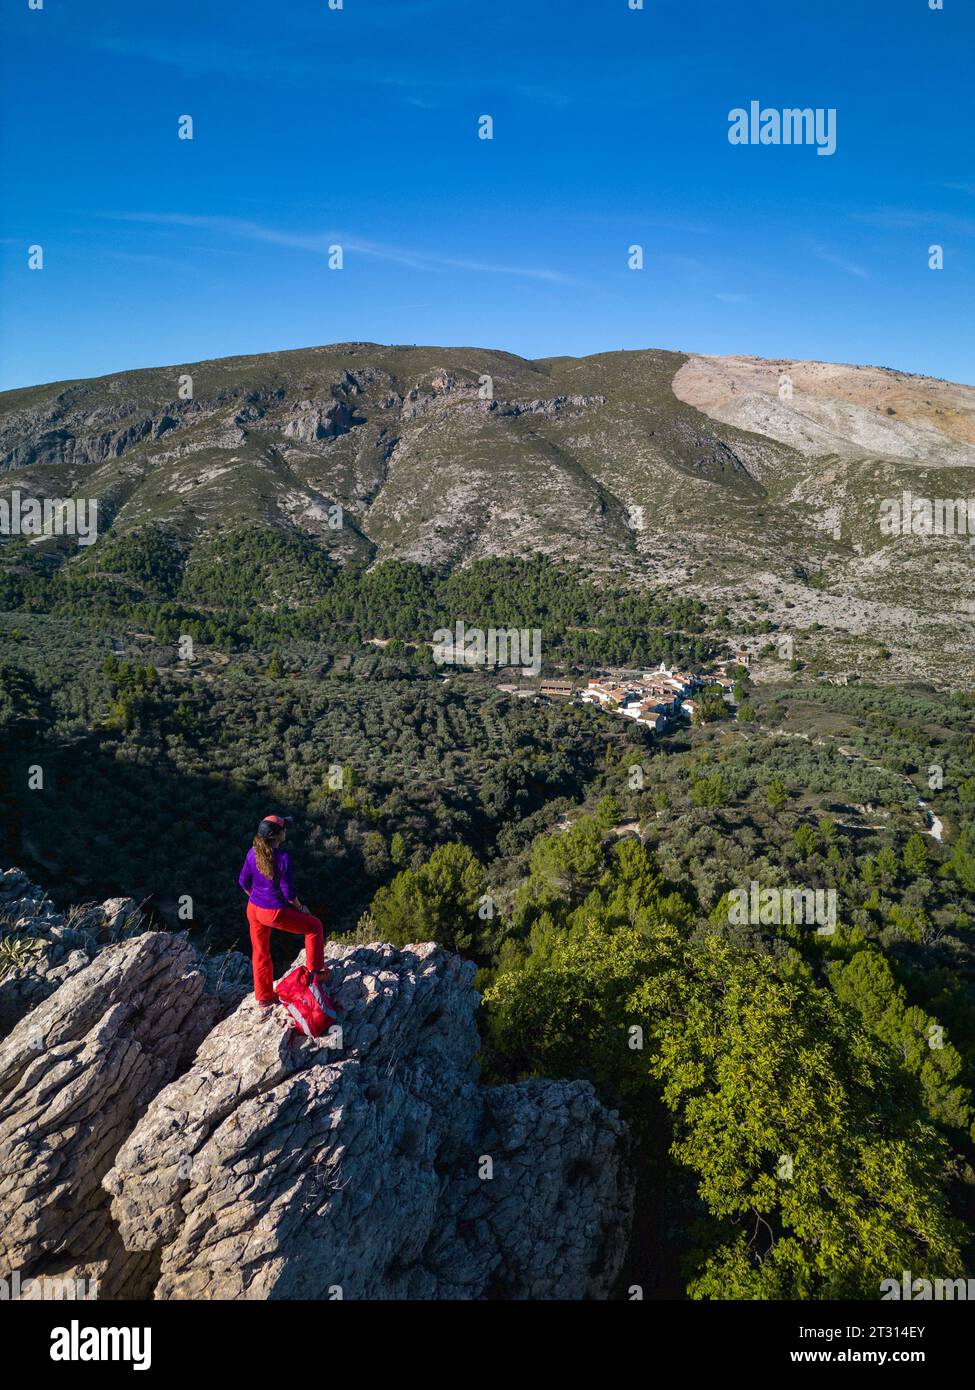 Female hiker looks out above a valley of Famorca village, Costa Blanca, Spain - stock photo Stock Photo